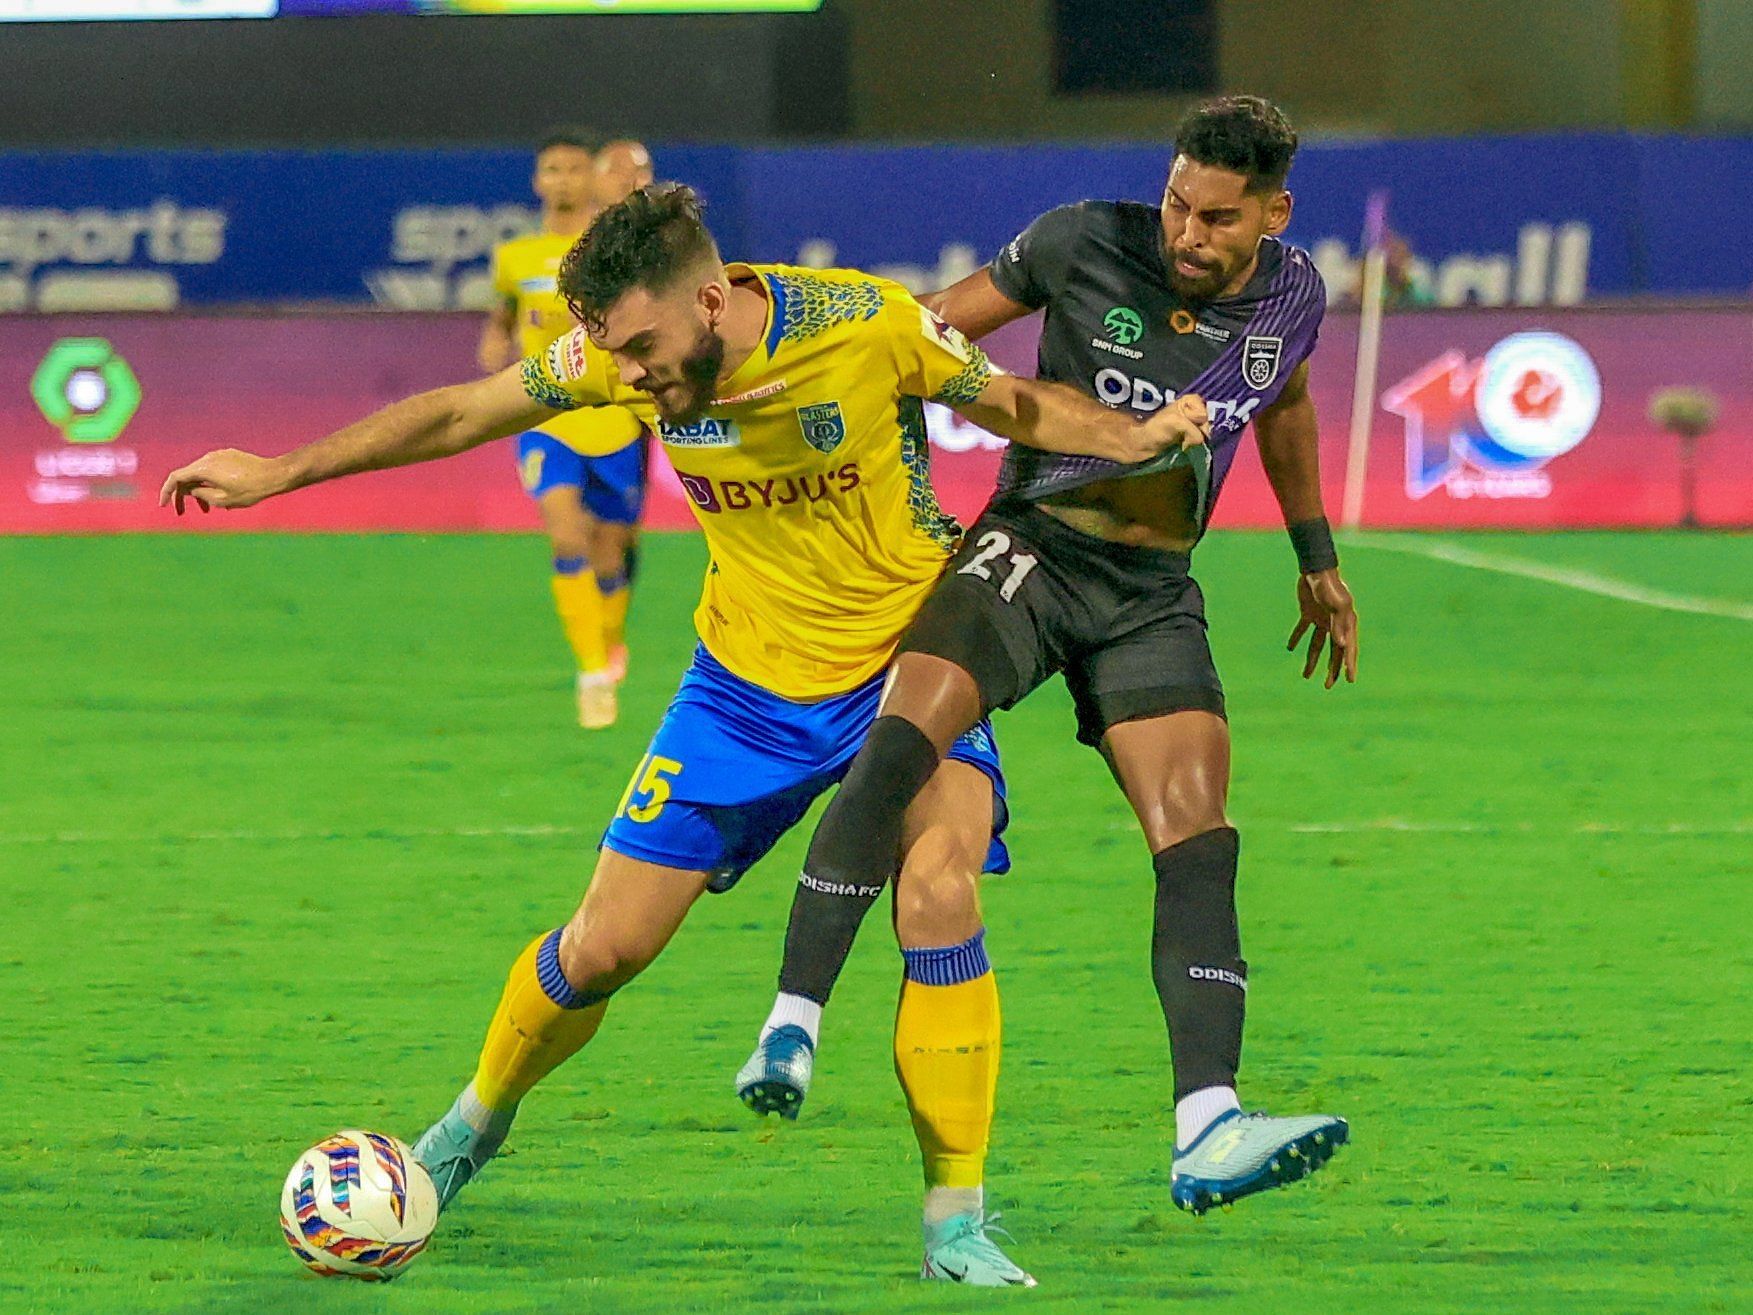 Kerala Blasters and Odisha FC players tussling for the ball.